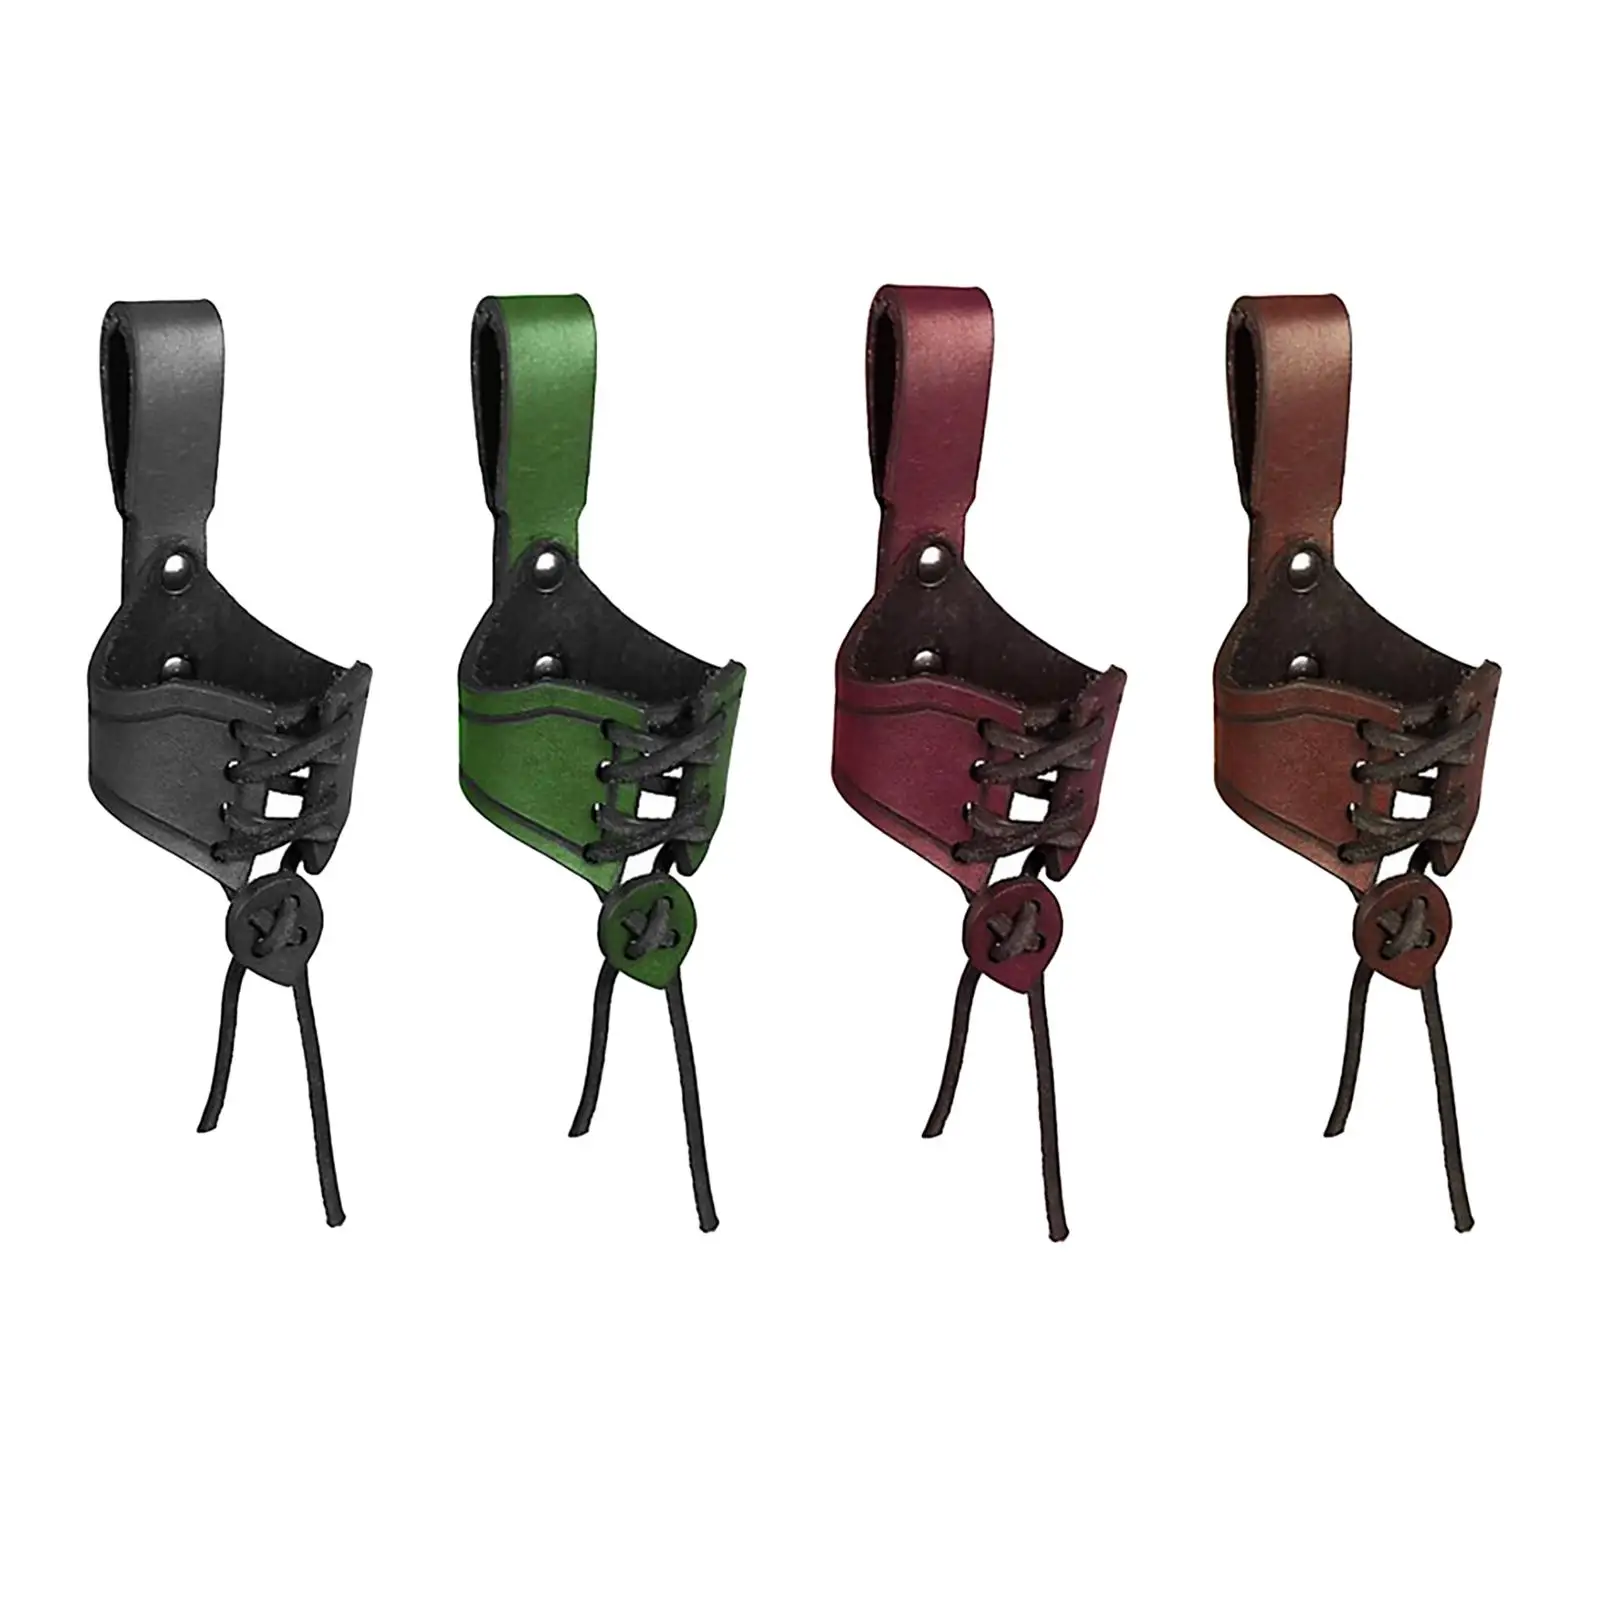 Horn Shape Cup Holder Ox Horn Cup Sleeve with Buckled Loop Beer Holster Leather Belt Attachment Tankard Pocket Foldable